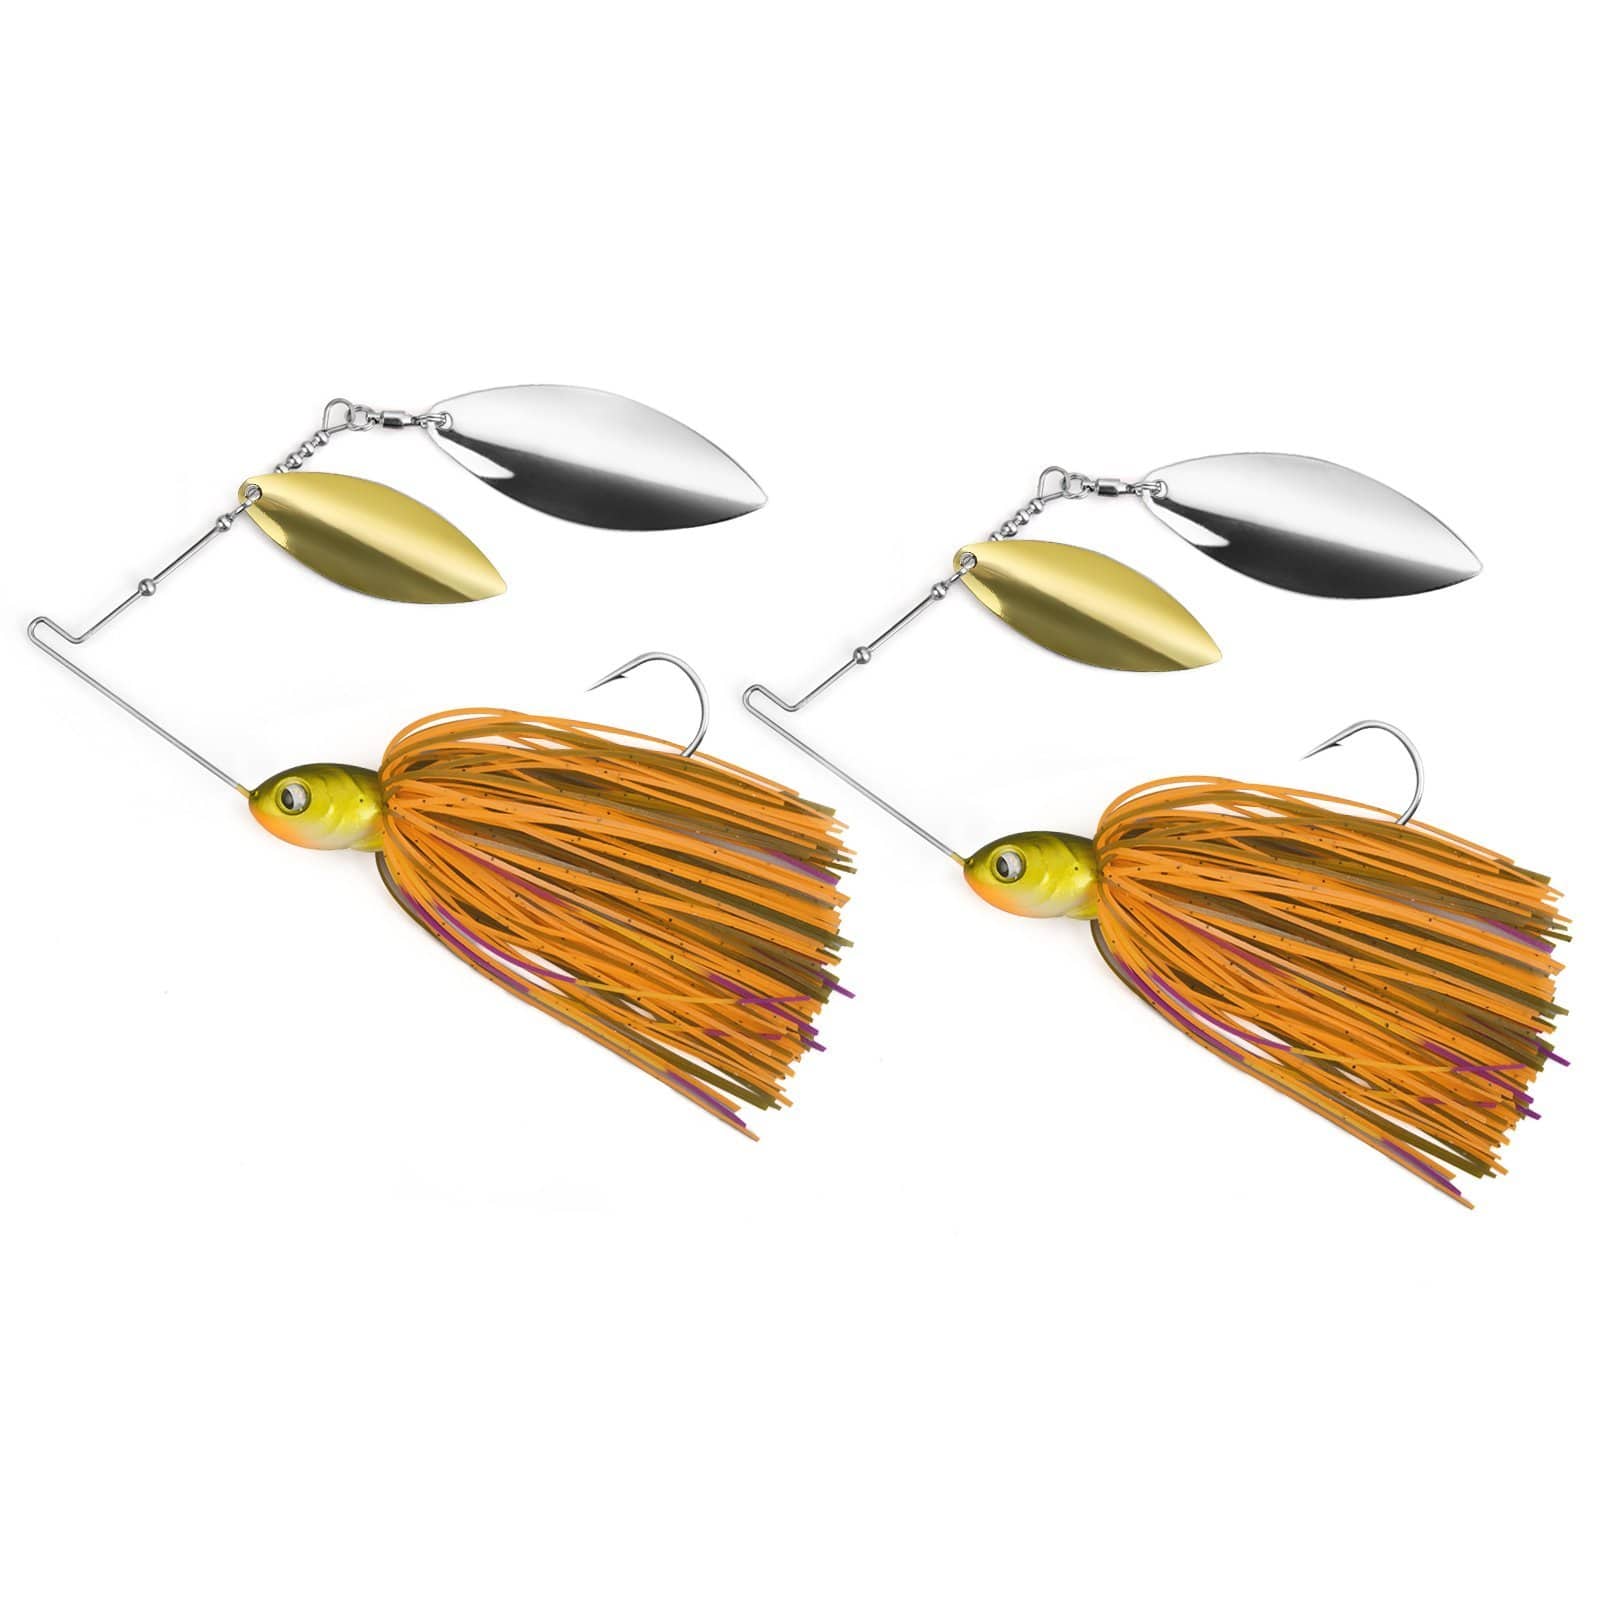 MadBite Spinnerbait Fishing Lures - 3/8 / Fire perch / 2